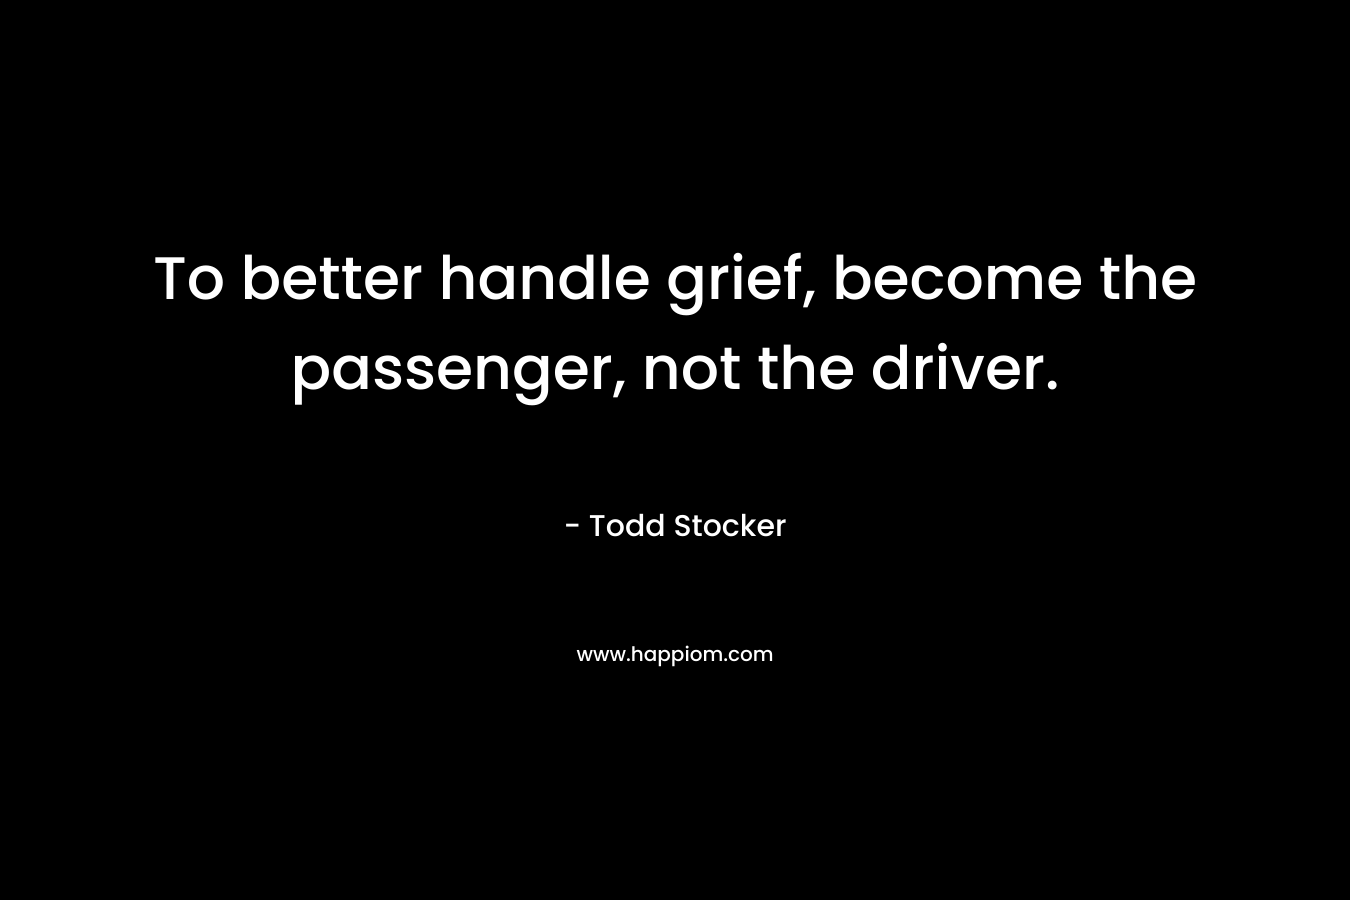 To better handle grief, become the passenger, not the driver. – Todd Stocker